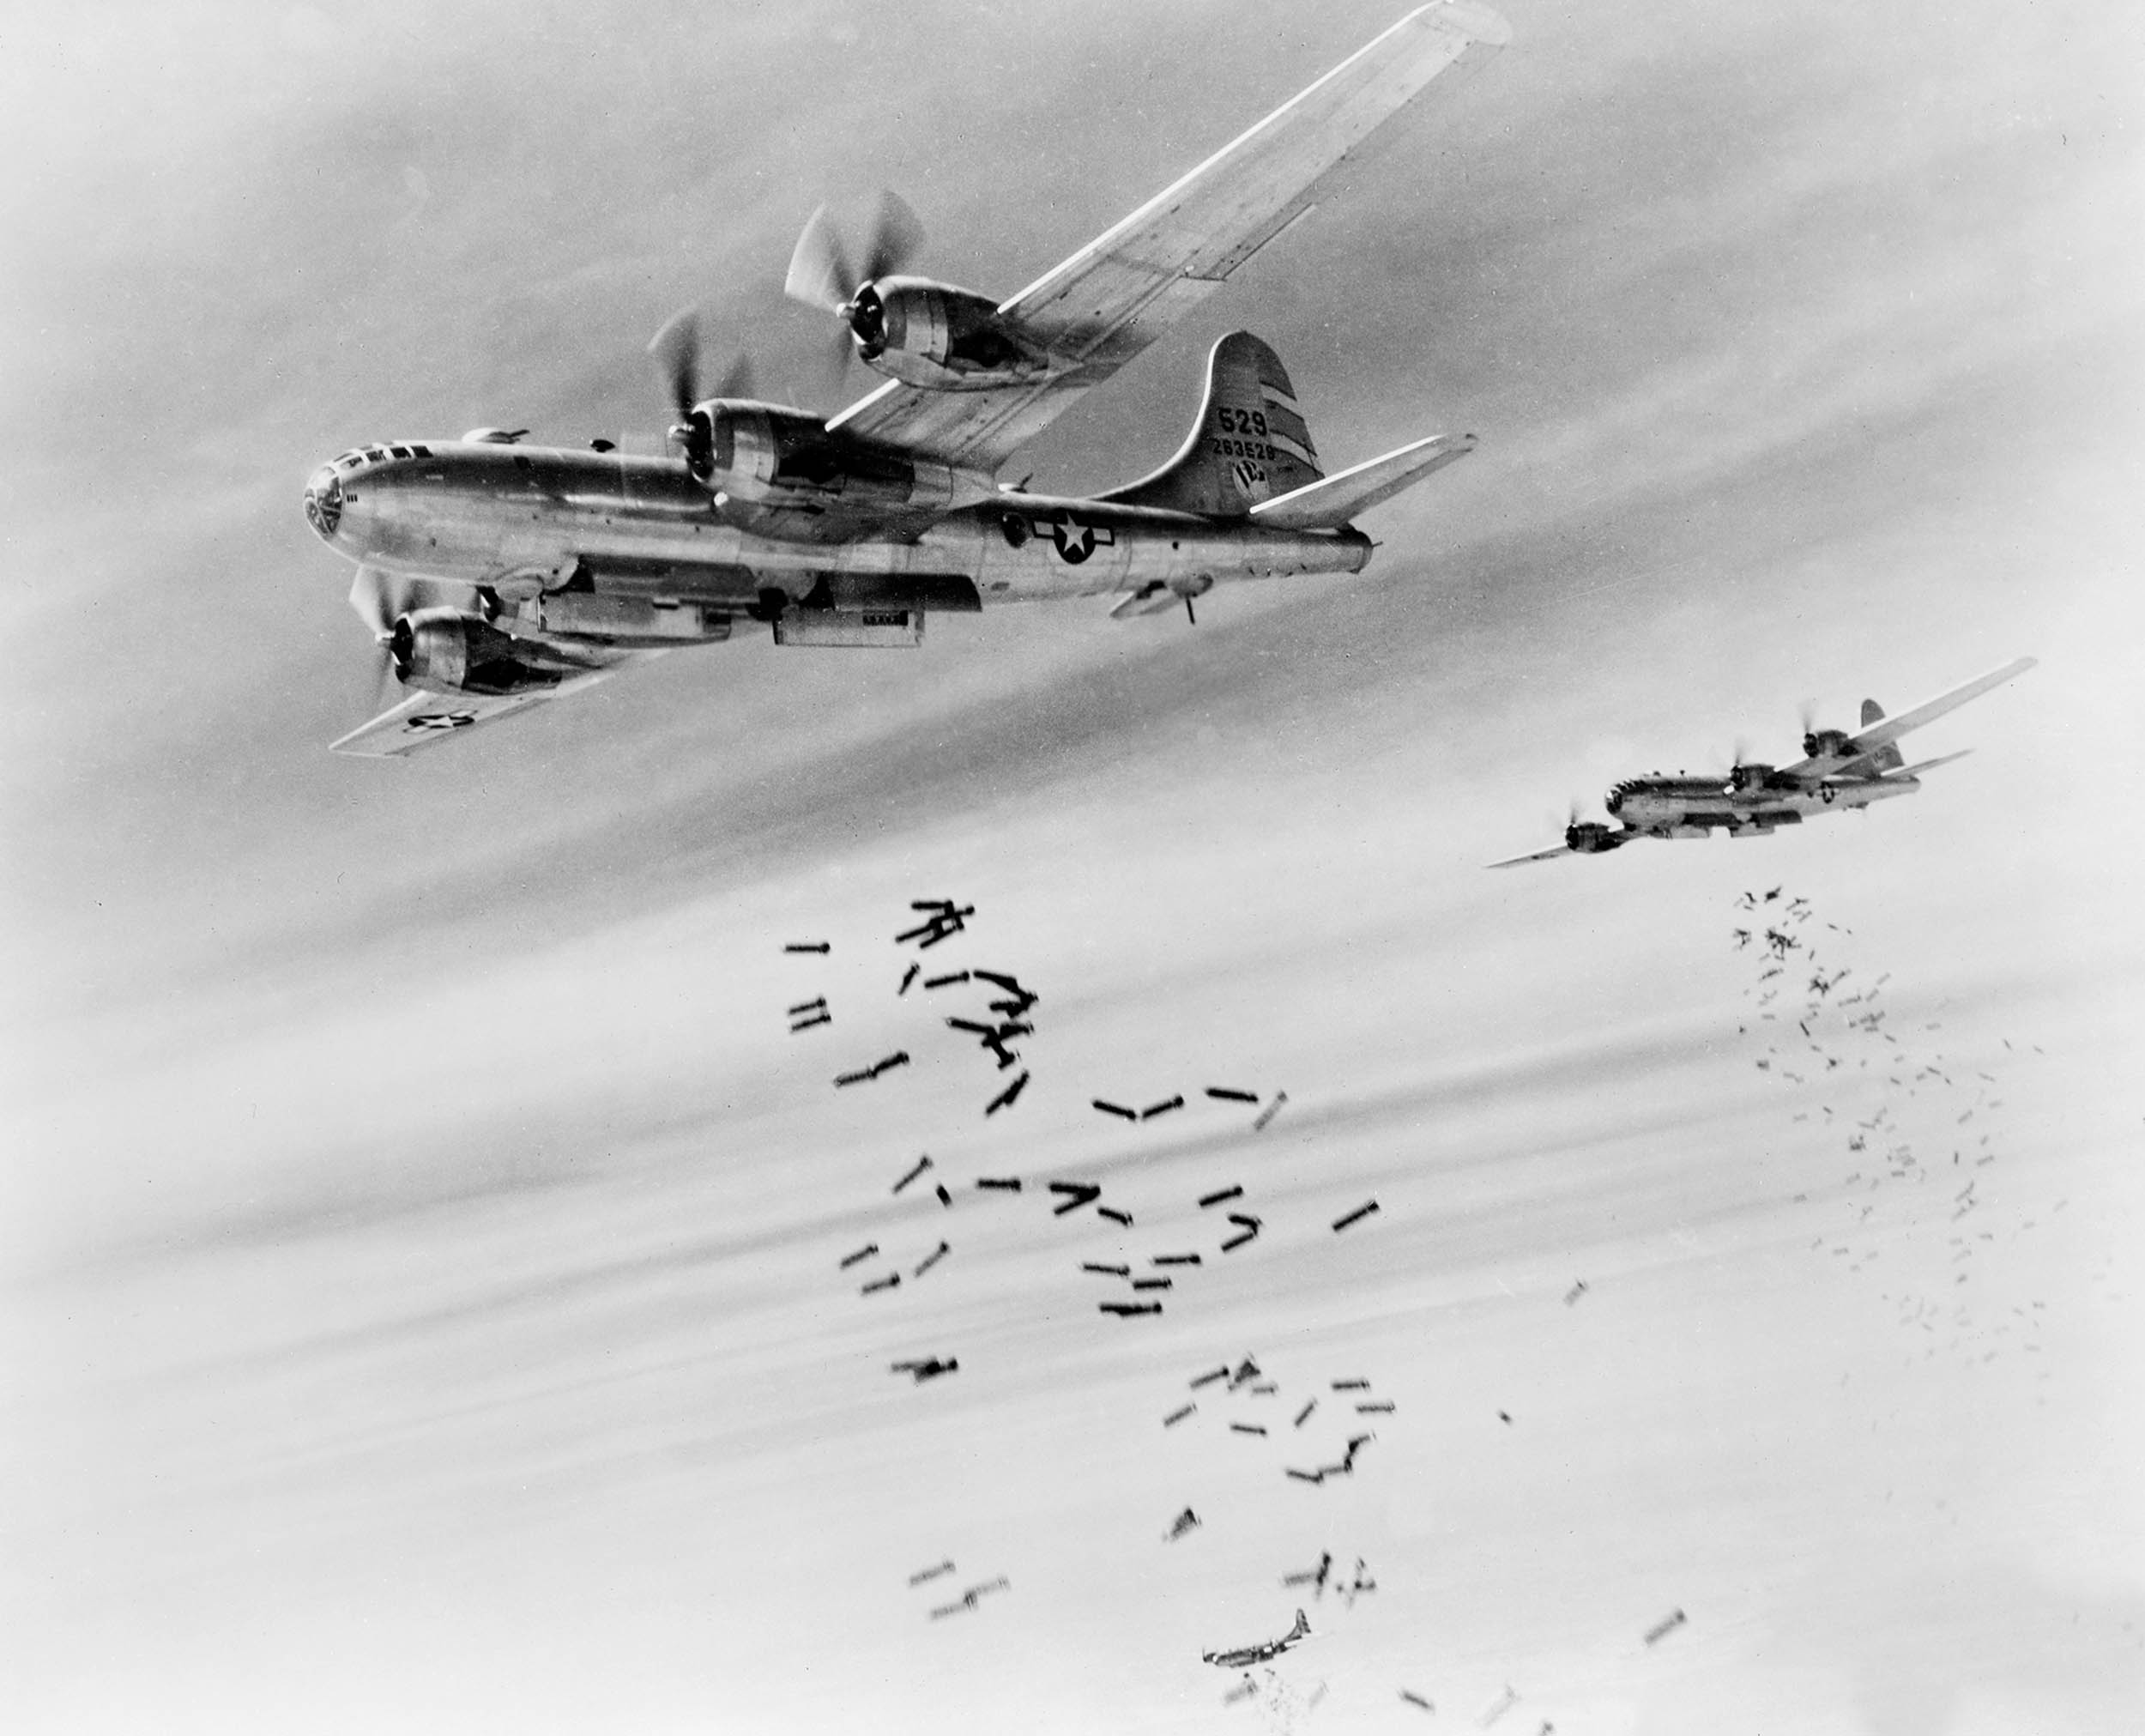 Bombs cascade from bomb bay doors of B-29 Superfortresseses during raid on Japanese supply depots near Mingaladon Airfield, February 28, 1945 (U.S. Army Signal Corps/Library of Congress)